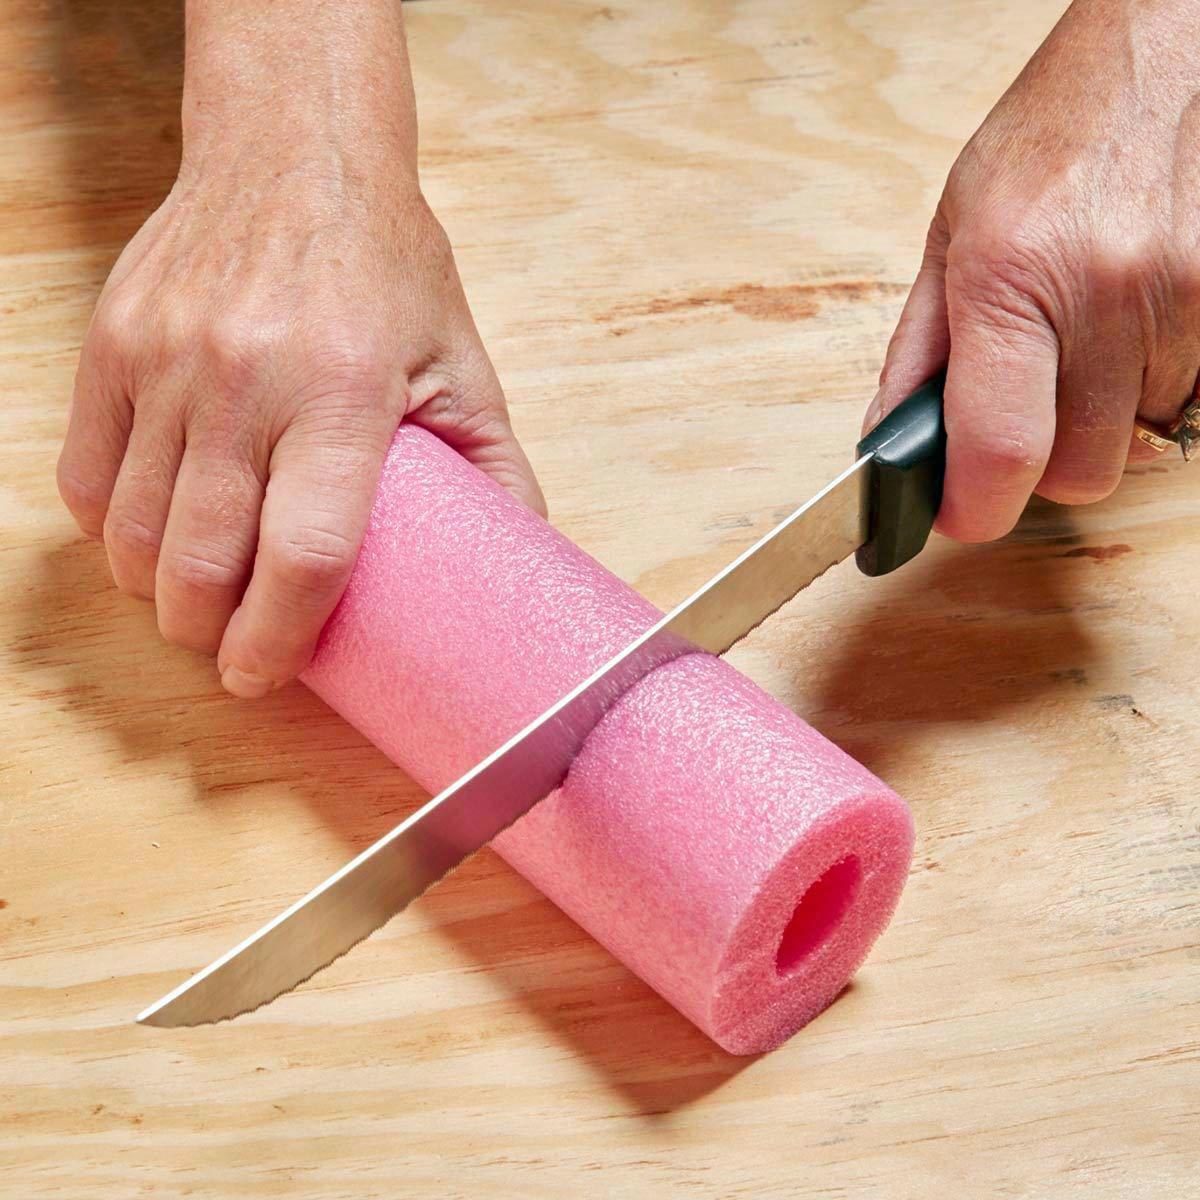 using a knife to cut a section off of a pink pool noodle